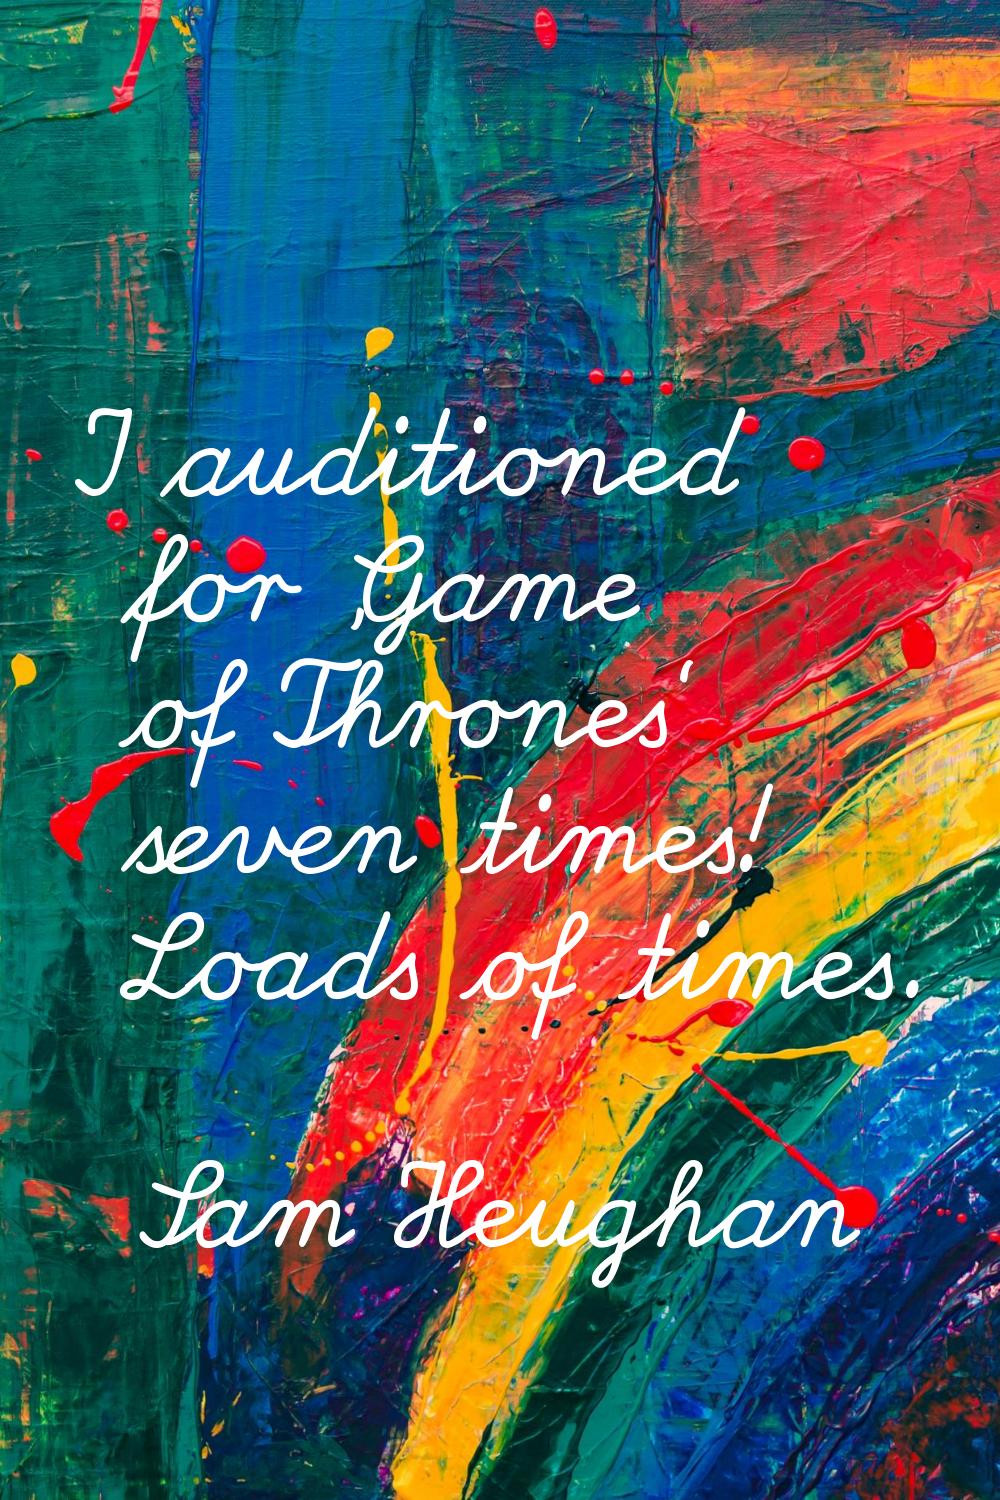 I auditioned for 'Game of Thrones' seven times! Loads of times.